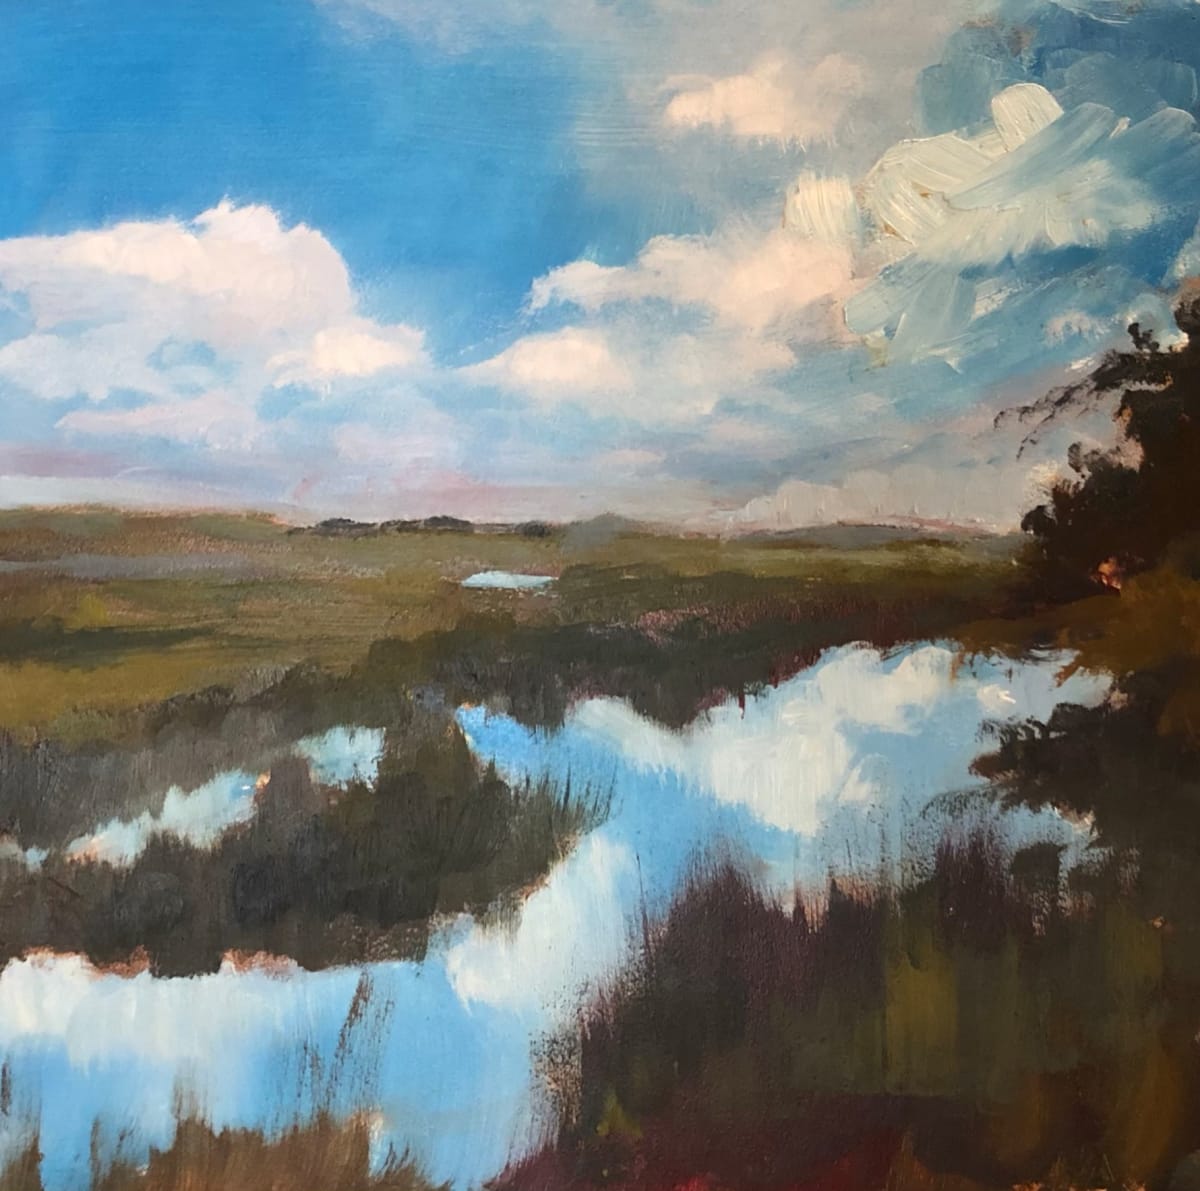 small scape-low country #15  Image: Scape Sketch Collection-special places on my journey of life

scape sketch-low country #15

6x6 oil on ampersand museum gesso panel 2022

This painting was inspired by the views of the marshlands in the low country of South Carolina.